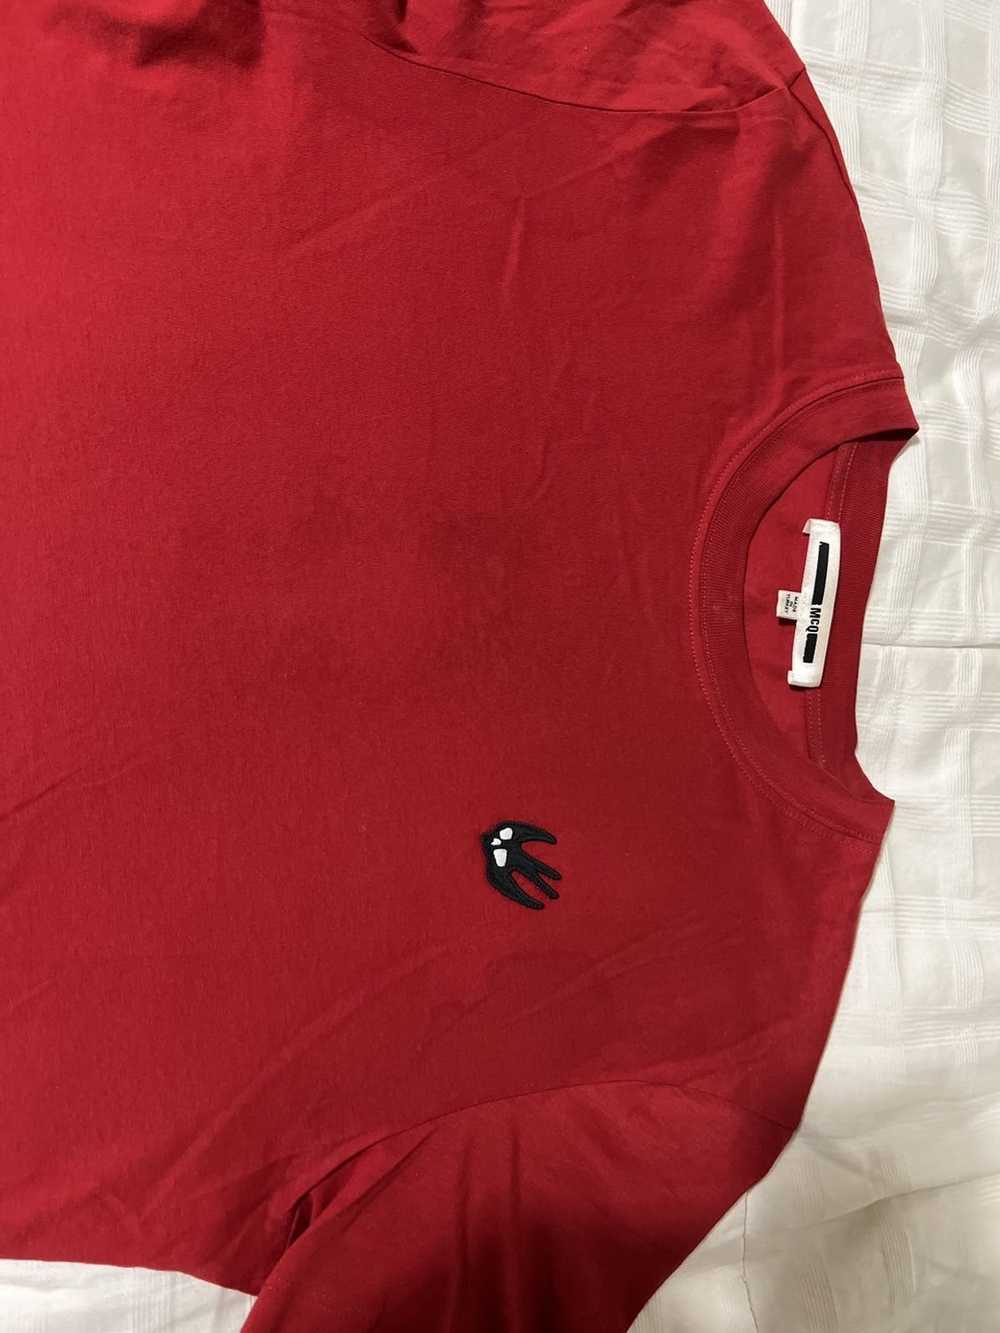 Alexander McQueen Red basic MCQ tee - image 2